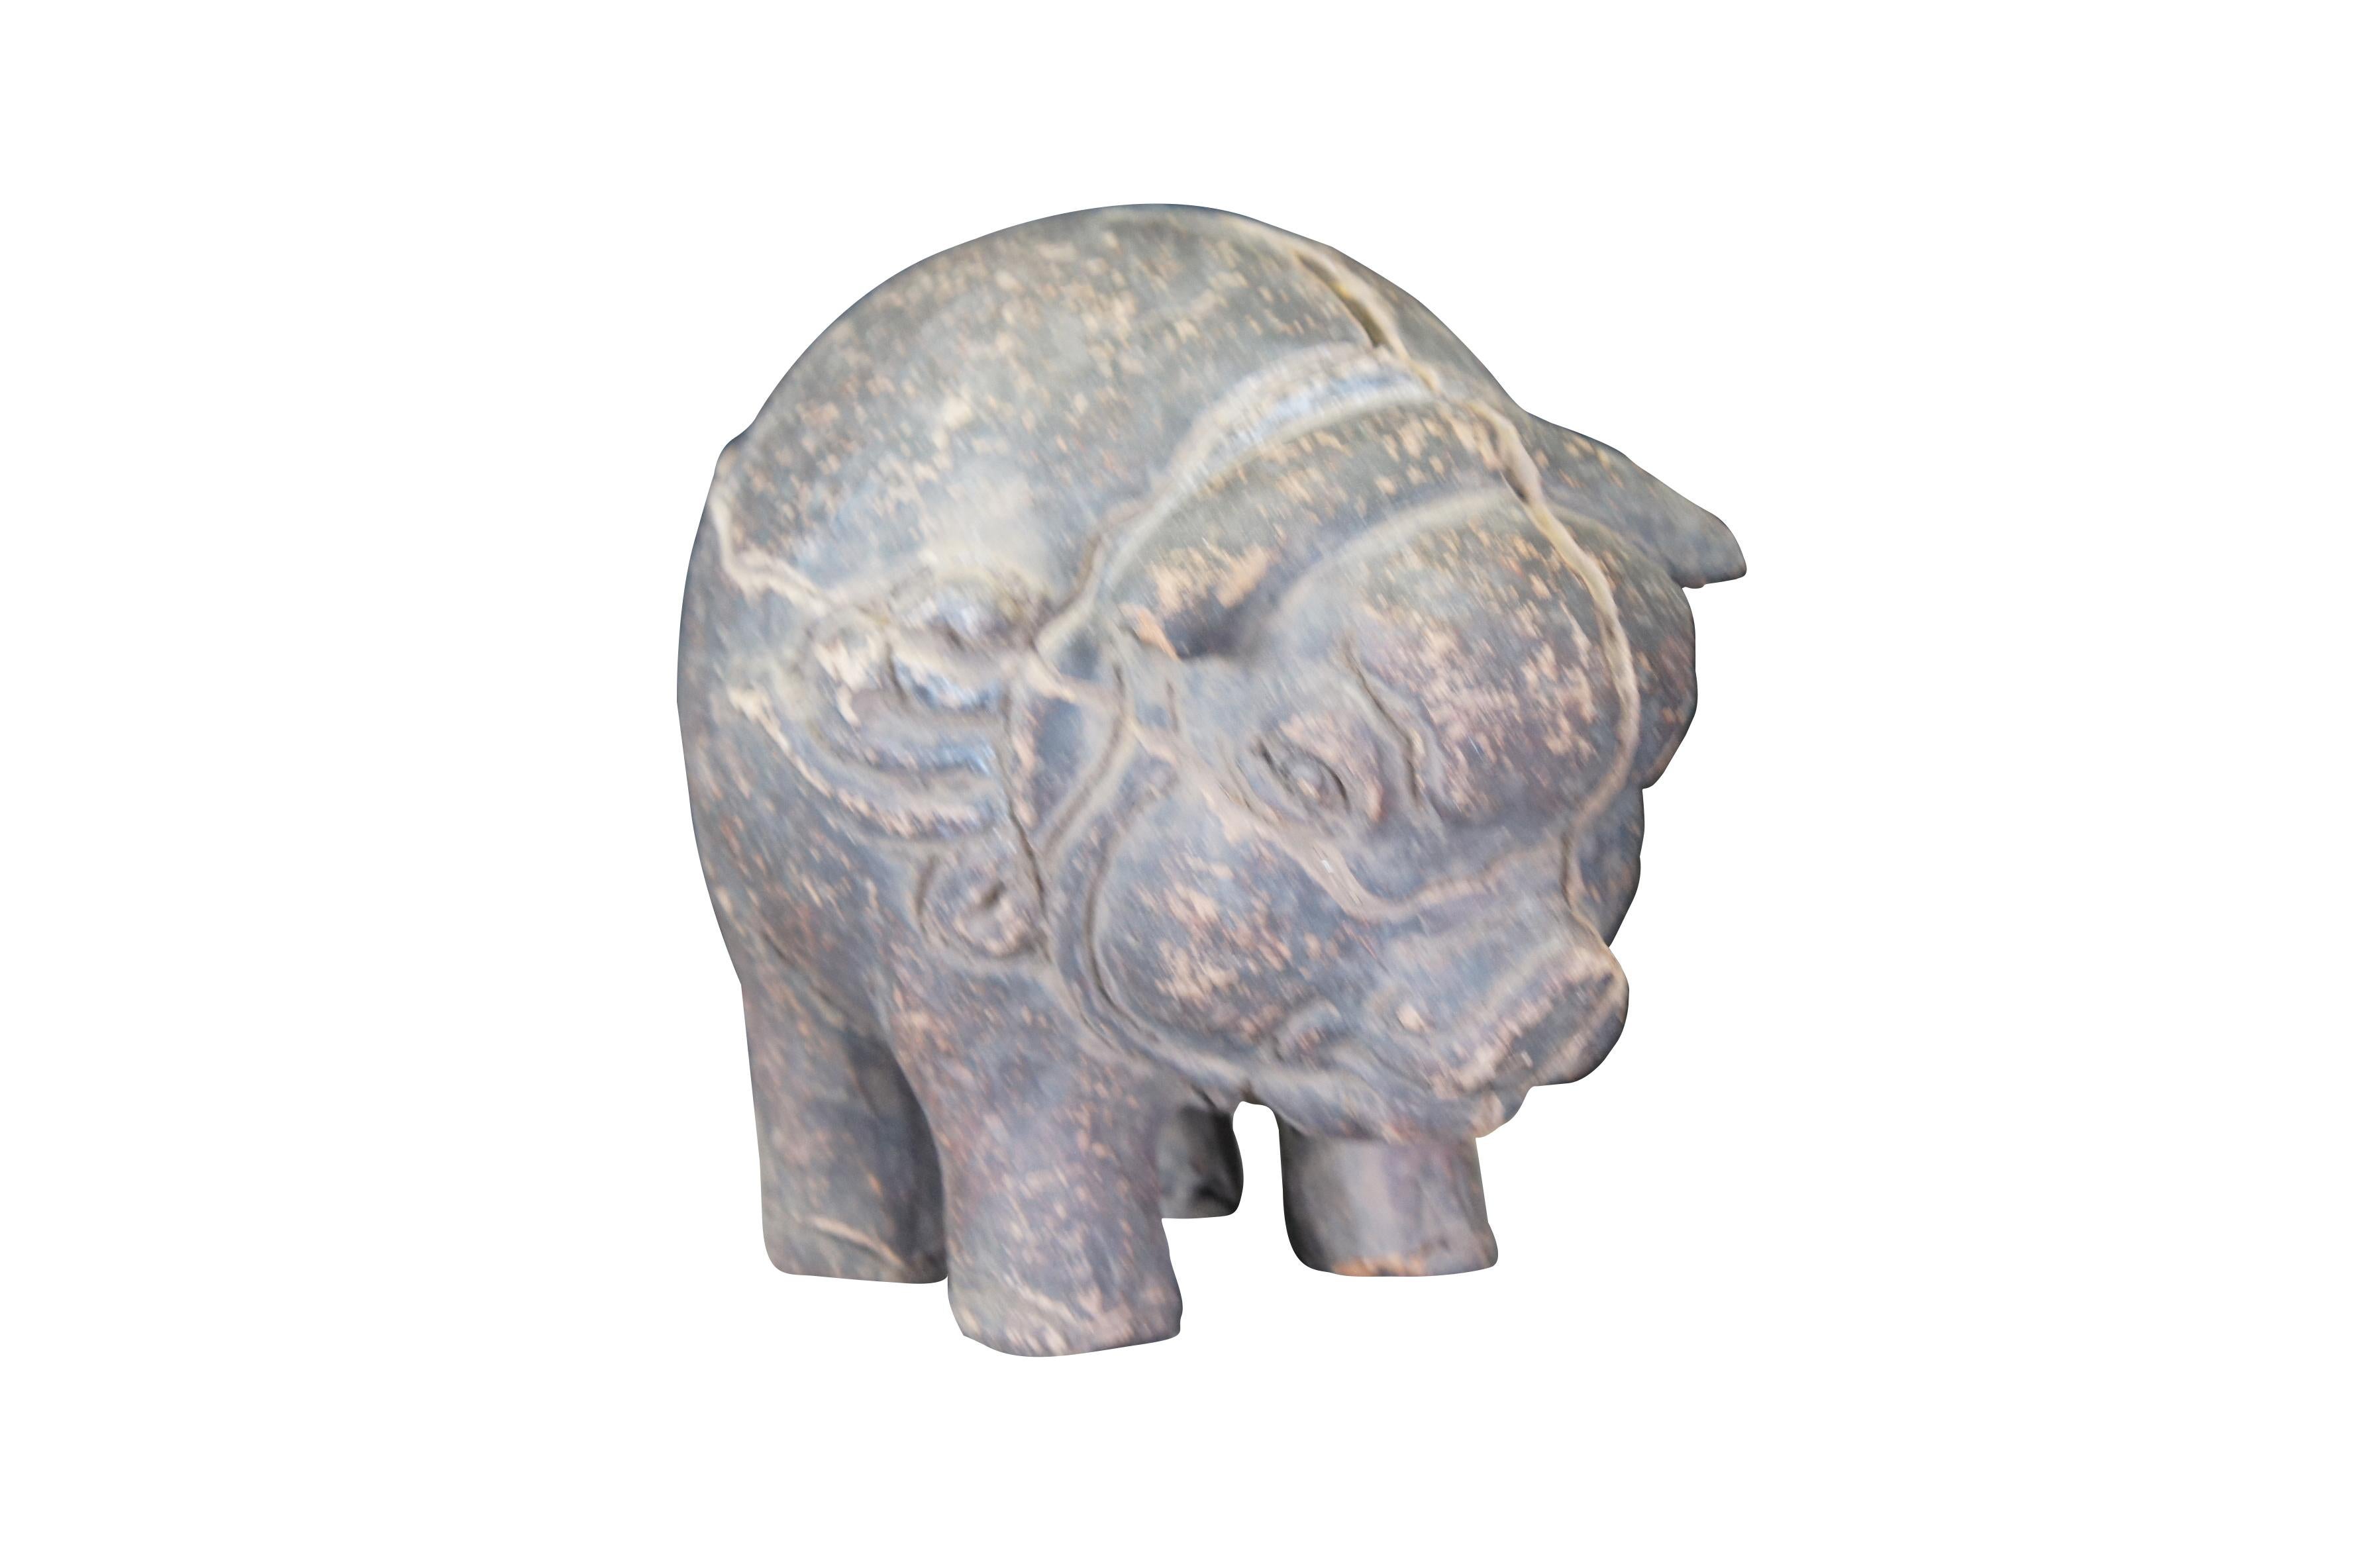 By the 15th century, terracotta piggy banks were made in all shapes and sizes. They were extremely common across all classes. Large numbers of them, most of them broken, have been excavated around the Majapahit capital of Wilwatikta (modern